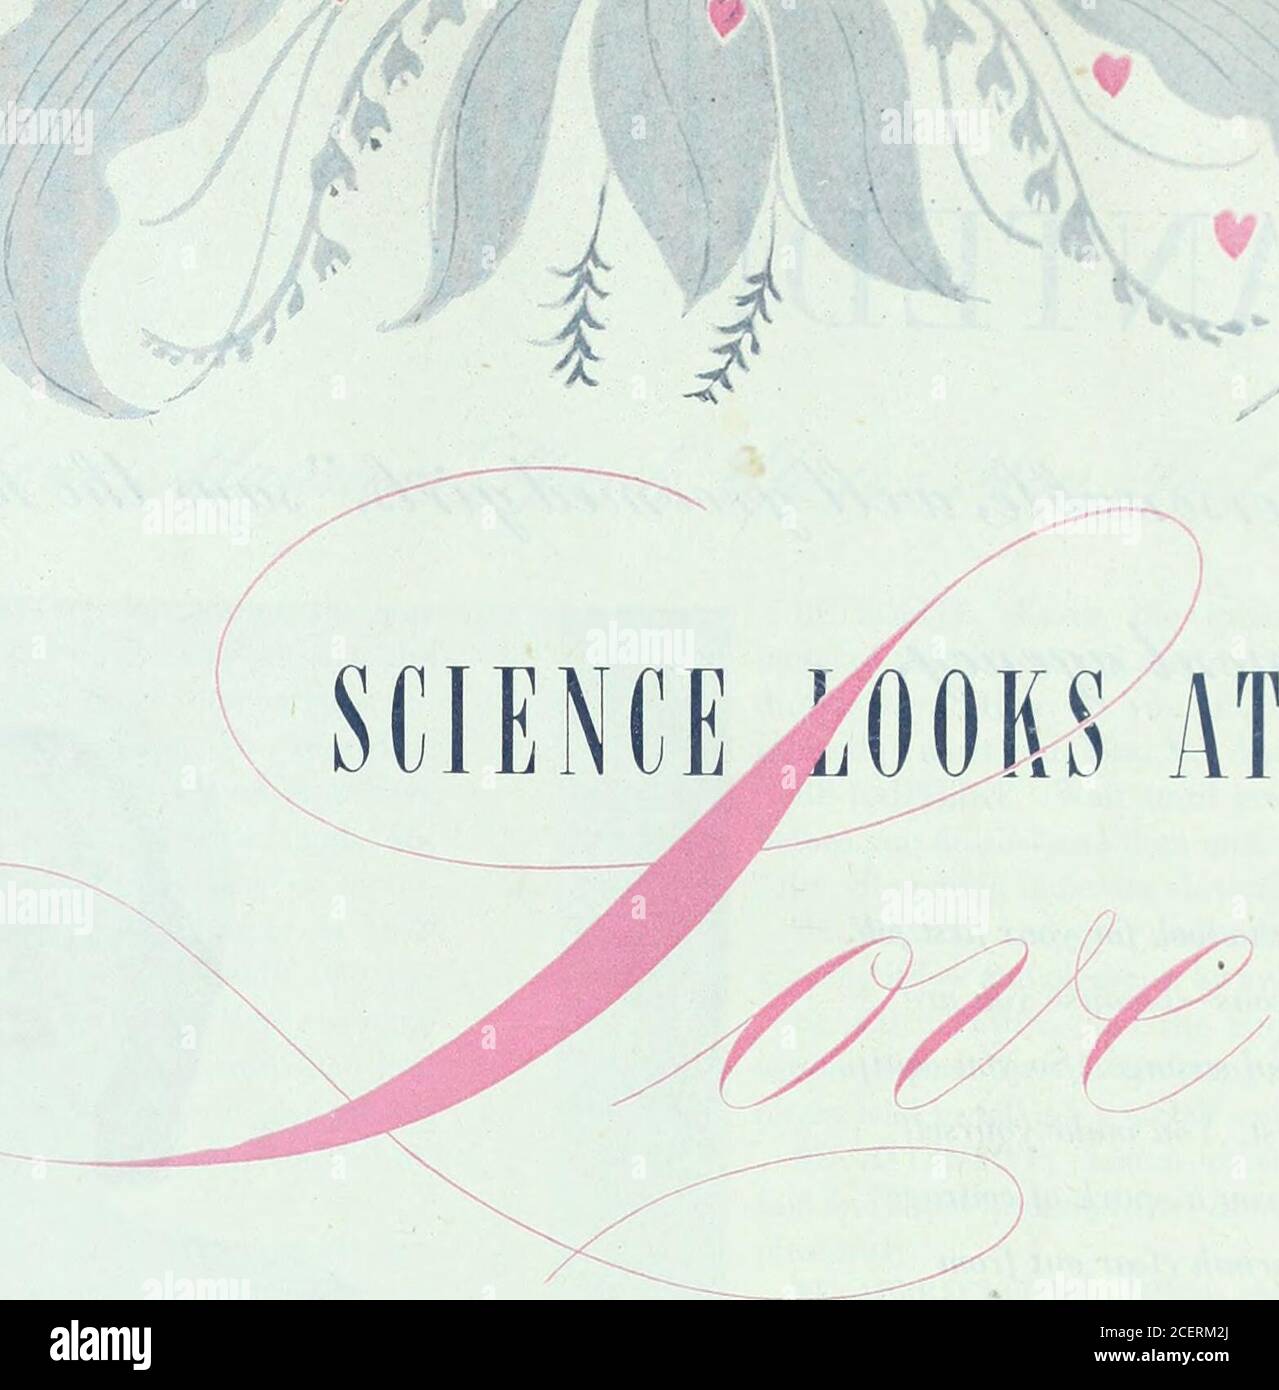 About scientific love facts Love, Actually: